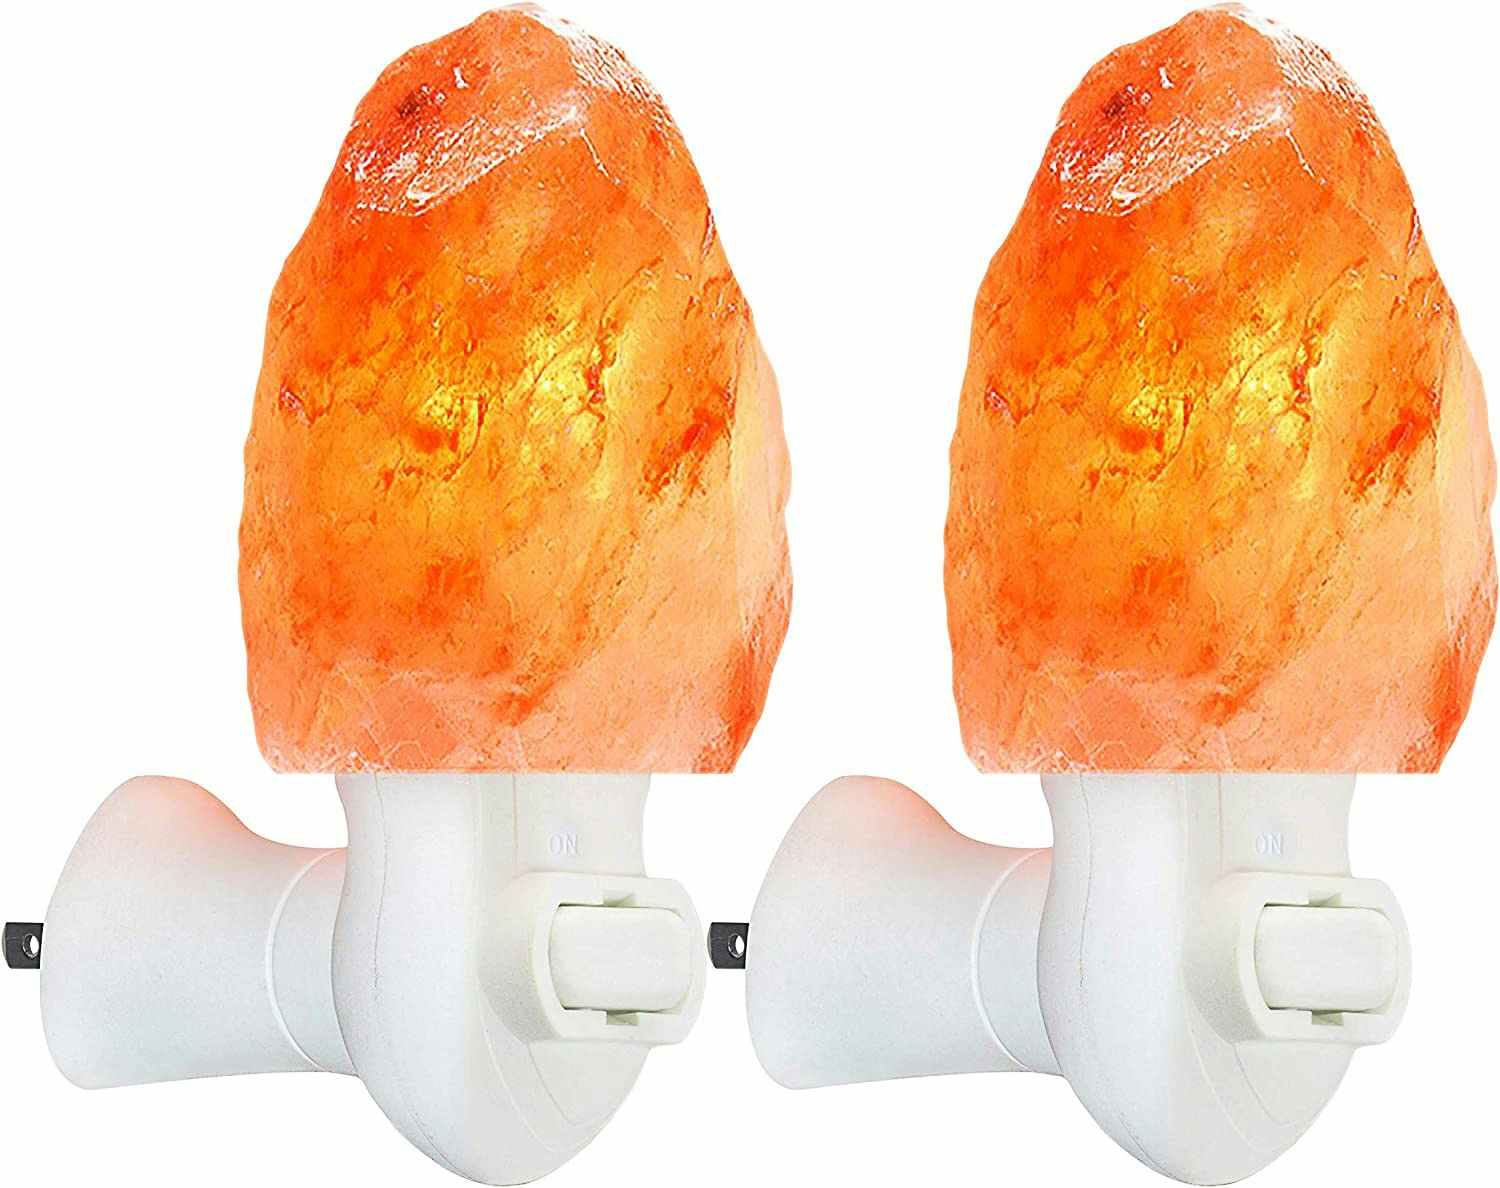 Two Himalayan salt lamp night lights on a white background